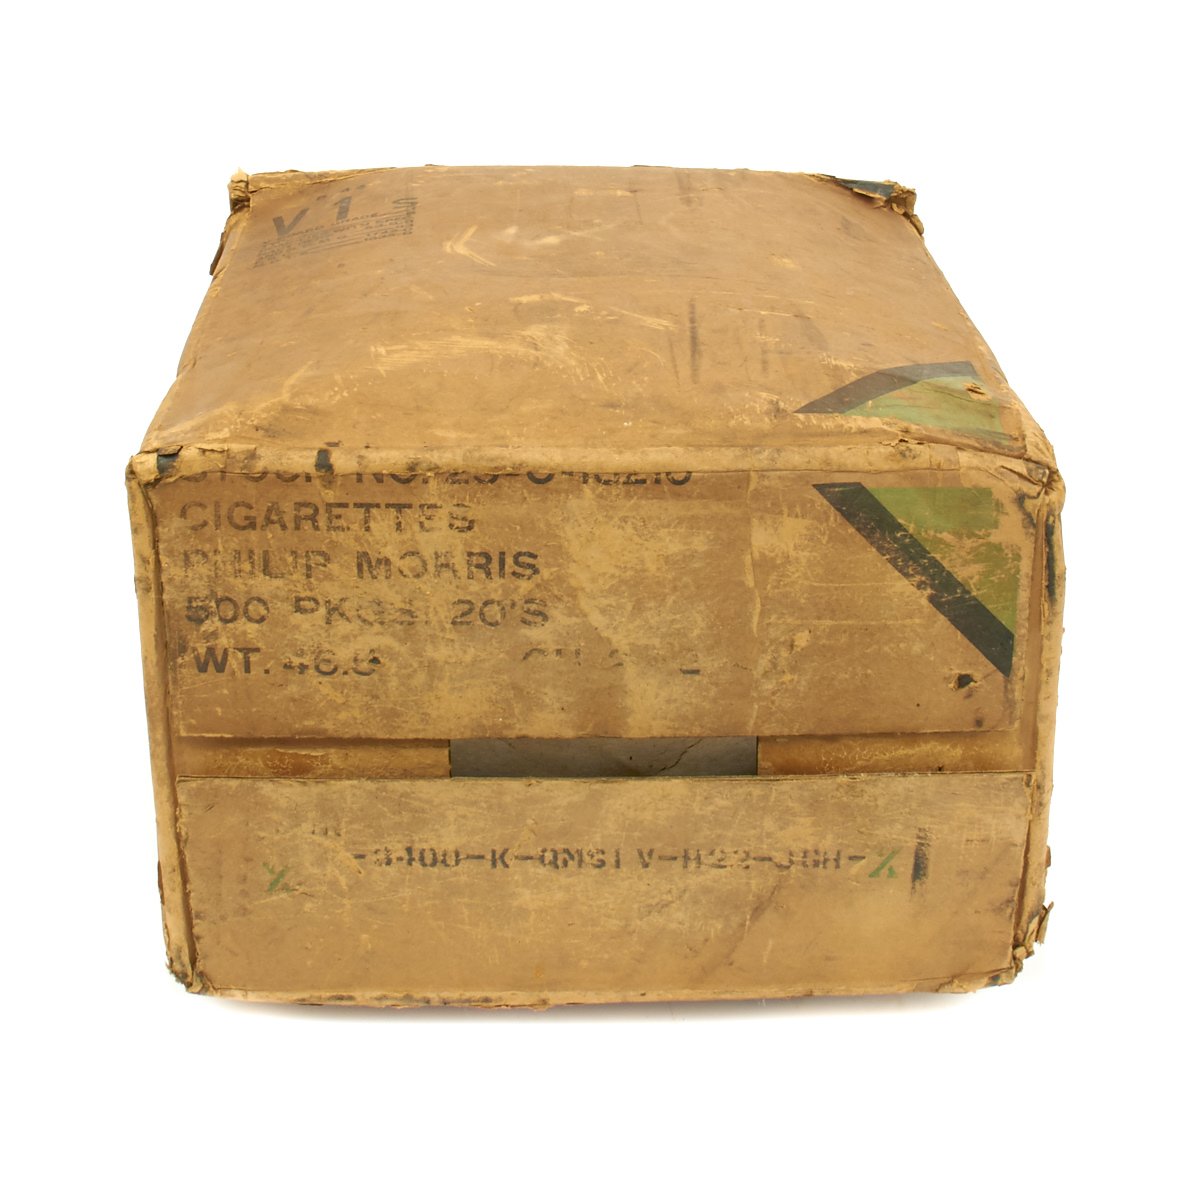 Original German WWII Luftwaffe Camouflage Fallschirmjager Paratrooper  Complete RZ20 Parachute in Bring Home Box with Certificate - Dated 1942 –  International Military Antiques